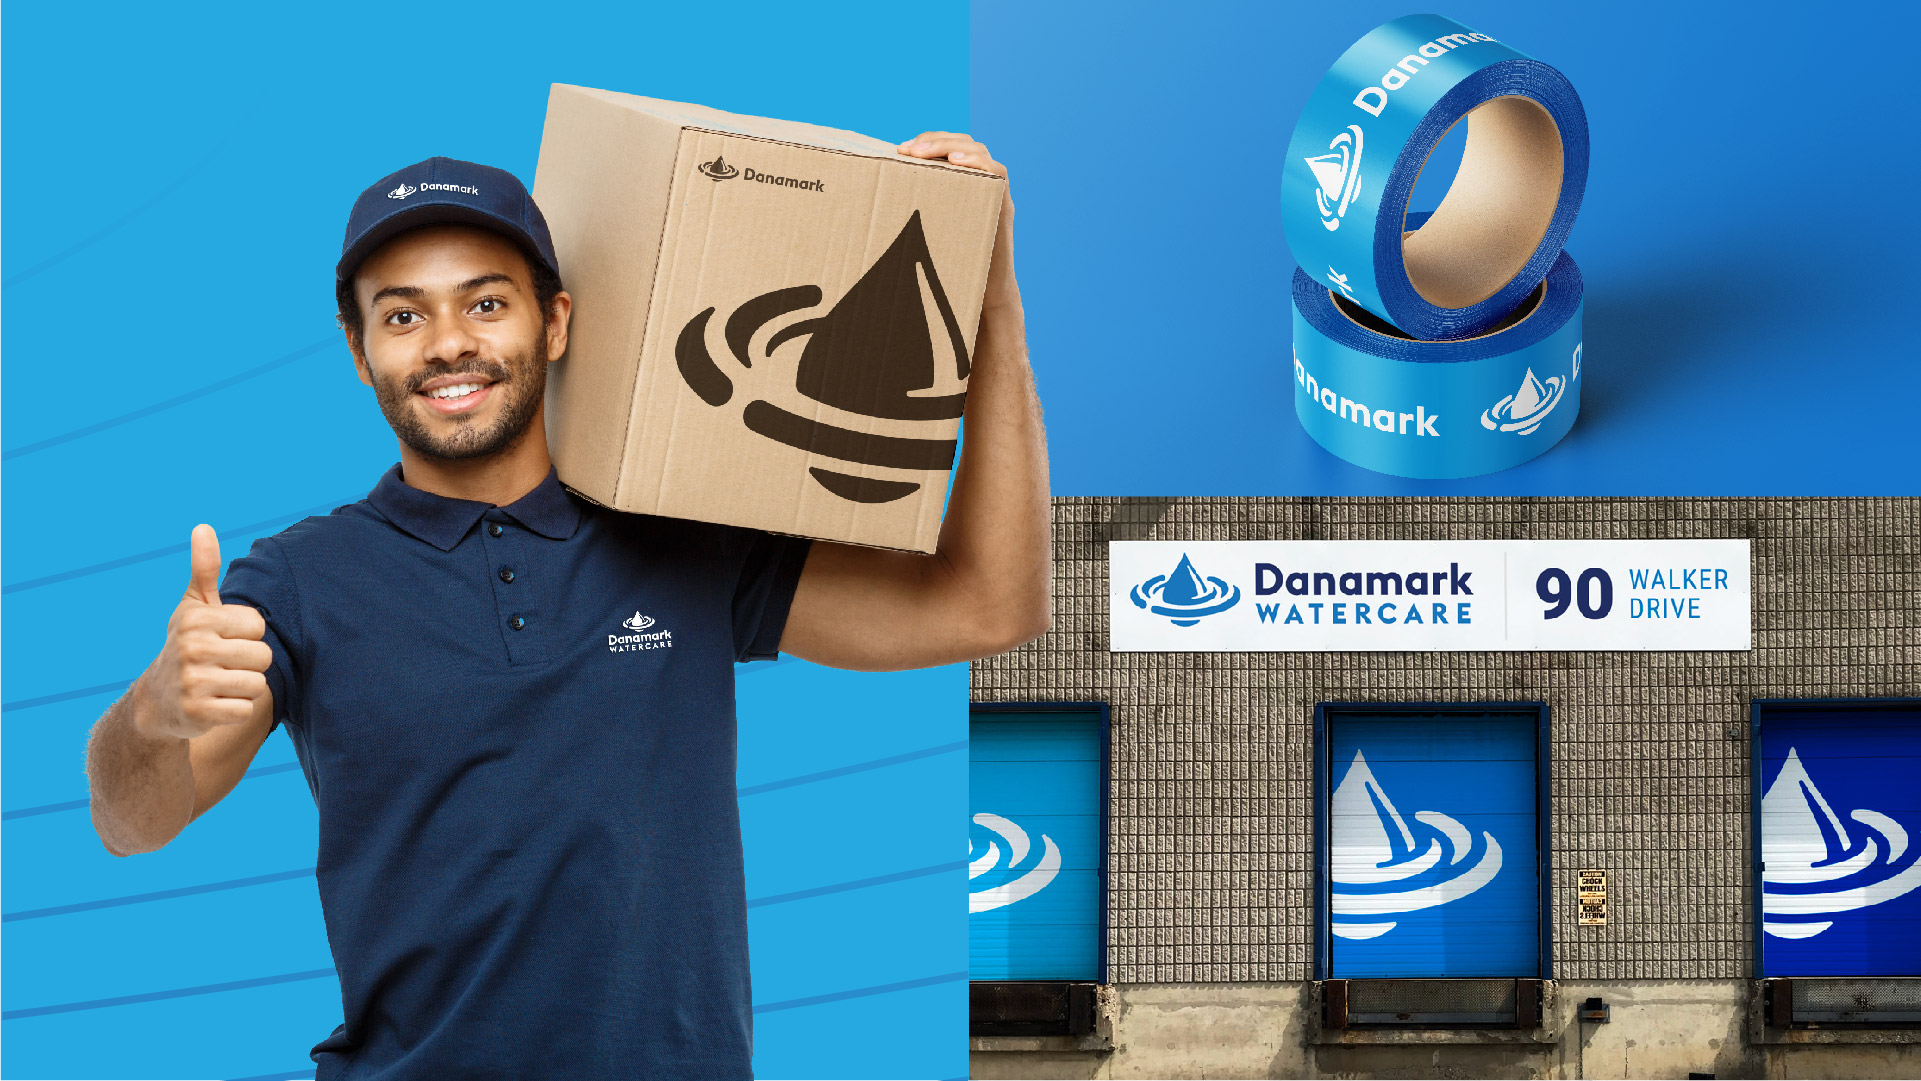 danamark watercare employee uniform packing box and tape as well as shipping and receiving signage